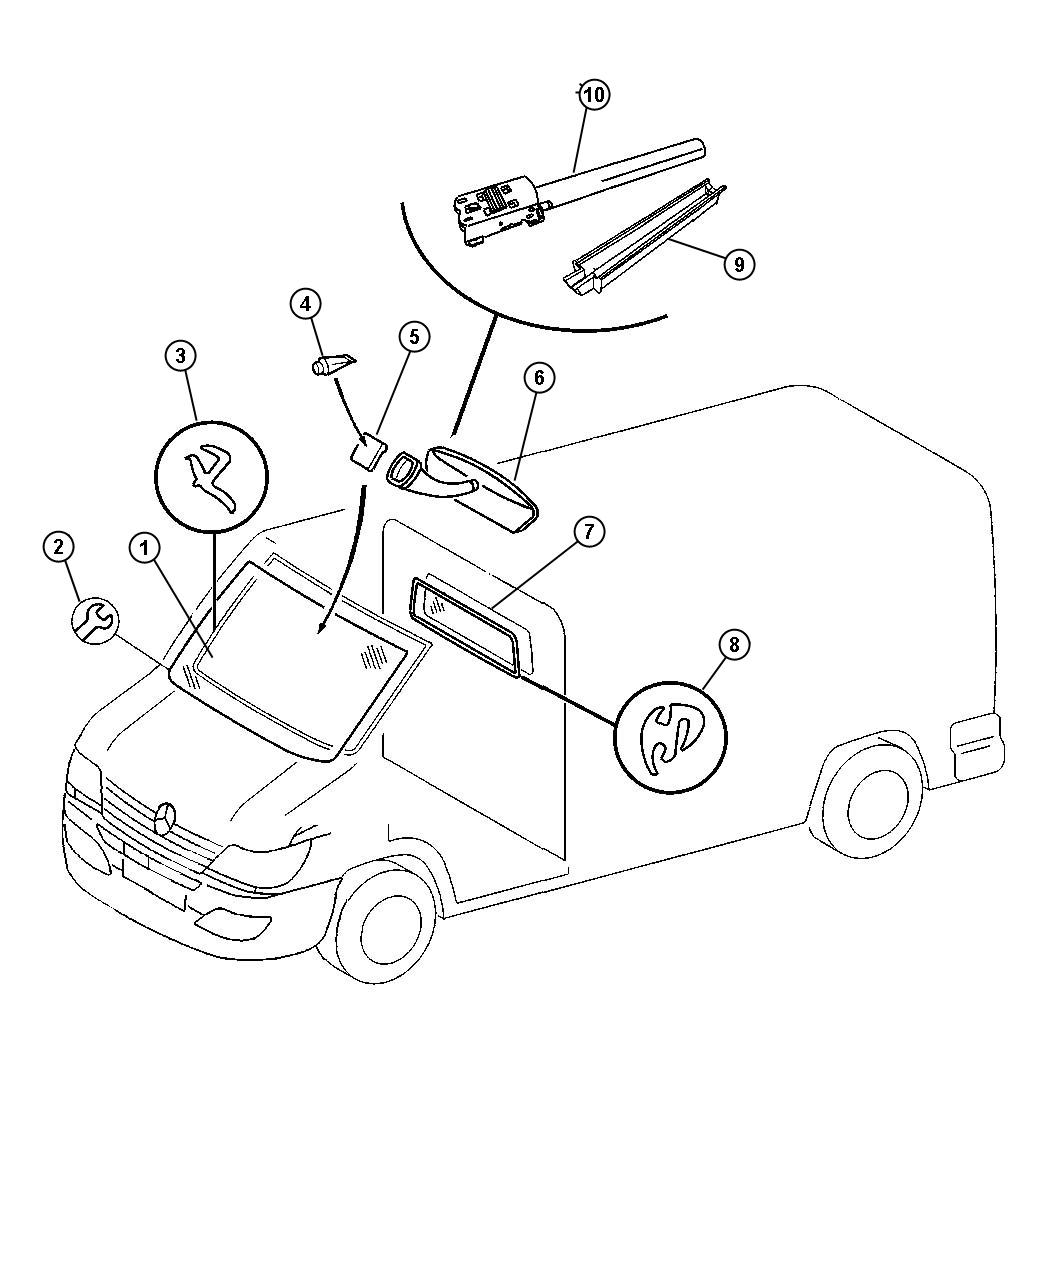 Windshield, Backlite and Rear View Mirror. Diagram